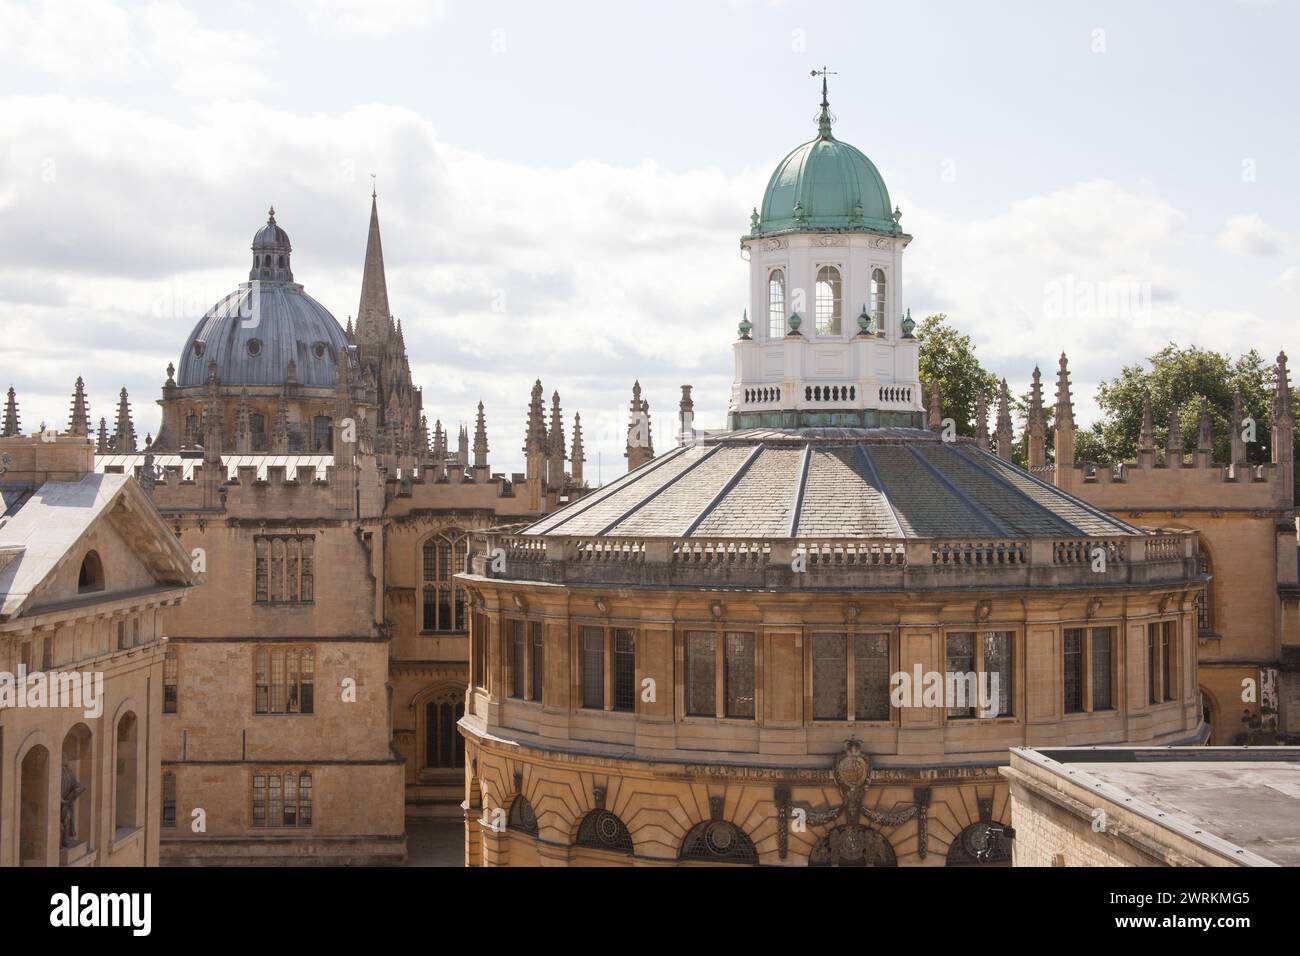 Views of Oxford including The Sheldonian Theatre, The Bodliean Library and The Radliffe Camera from the Weston Library in the UK Stock Photo